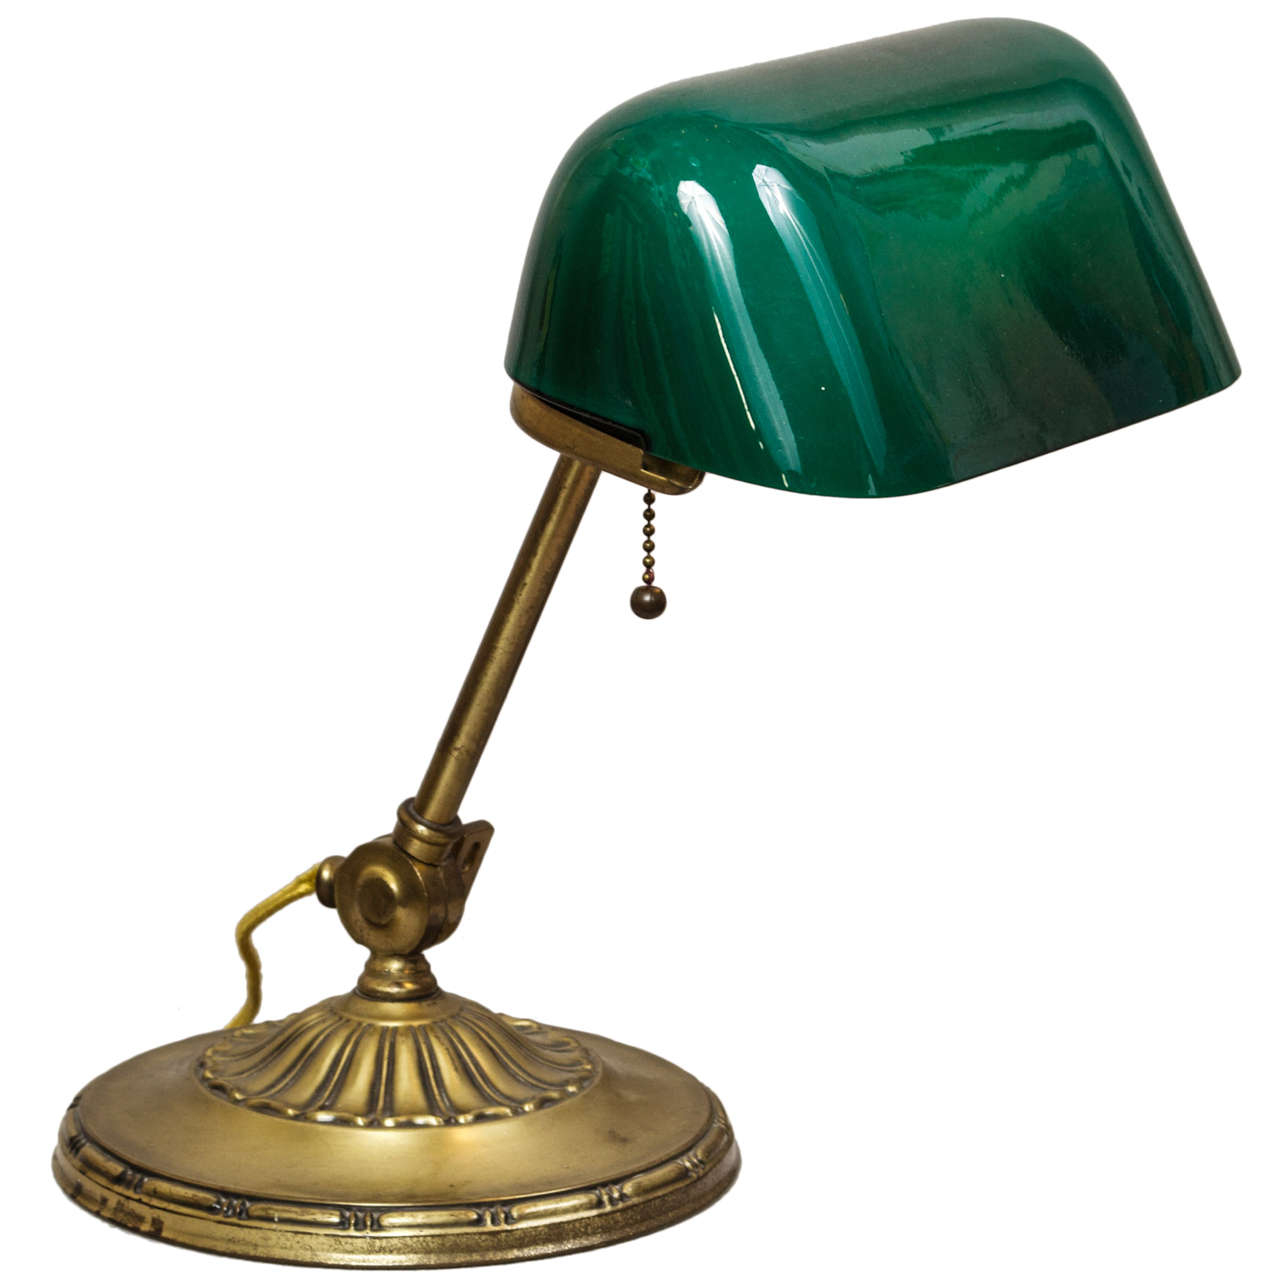 Bankers lamp with green cased glass shade from a unique